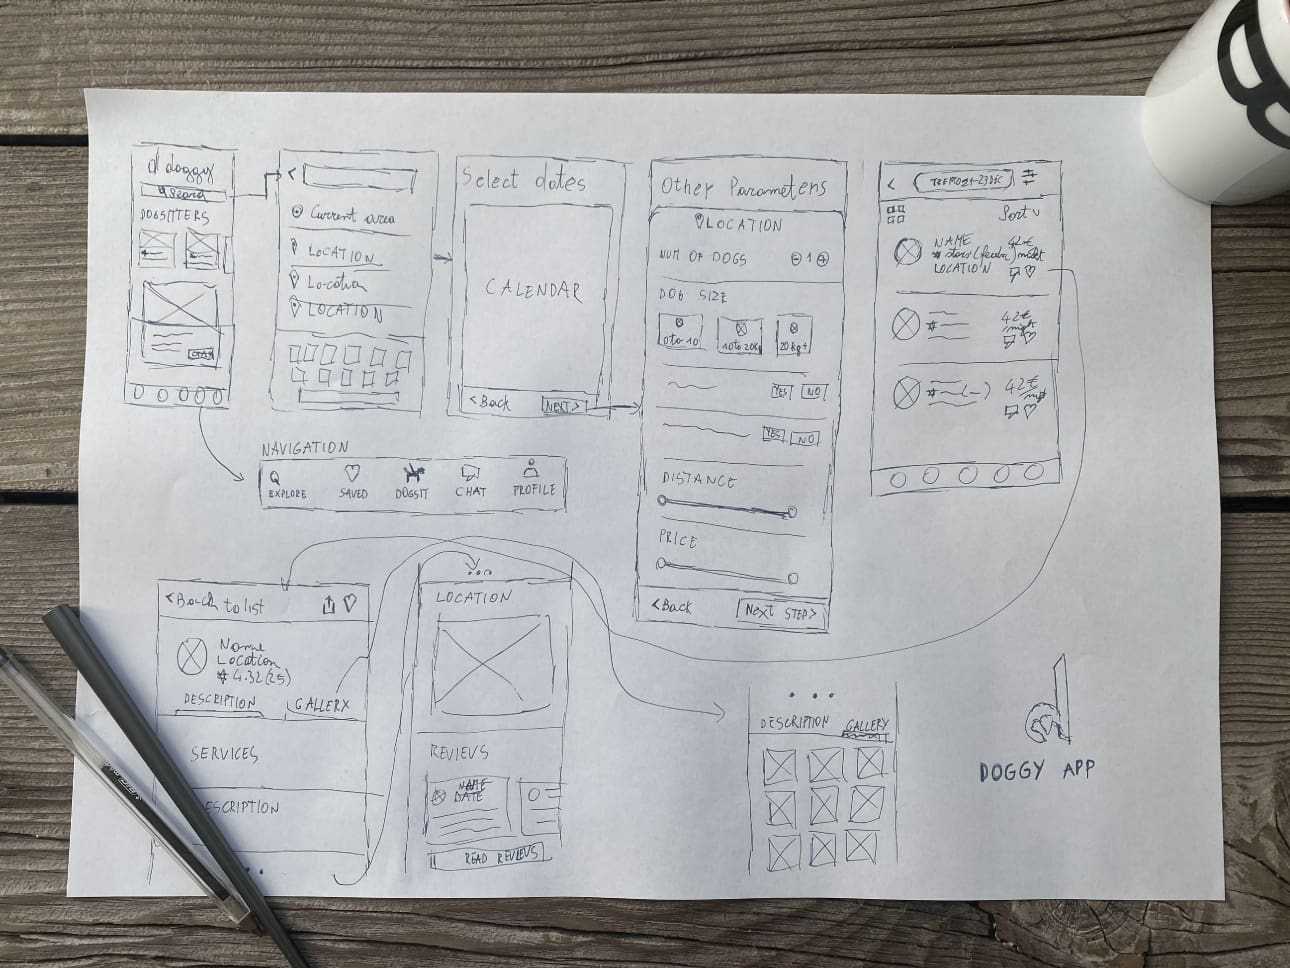 Wireframe made on paper showing the doggy app structure